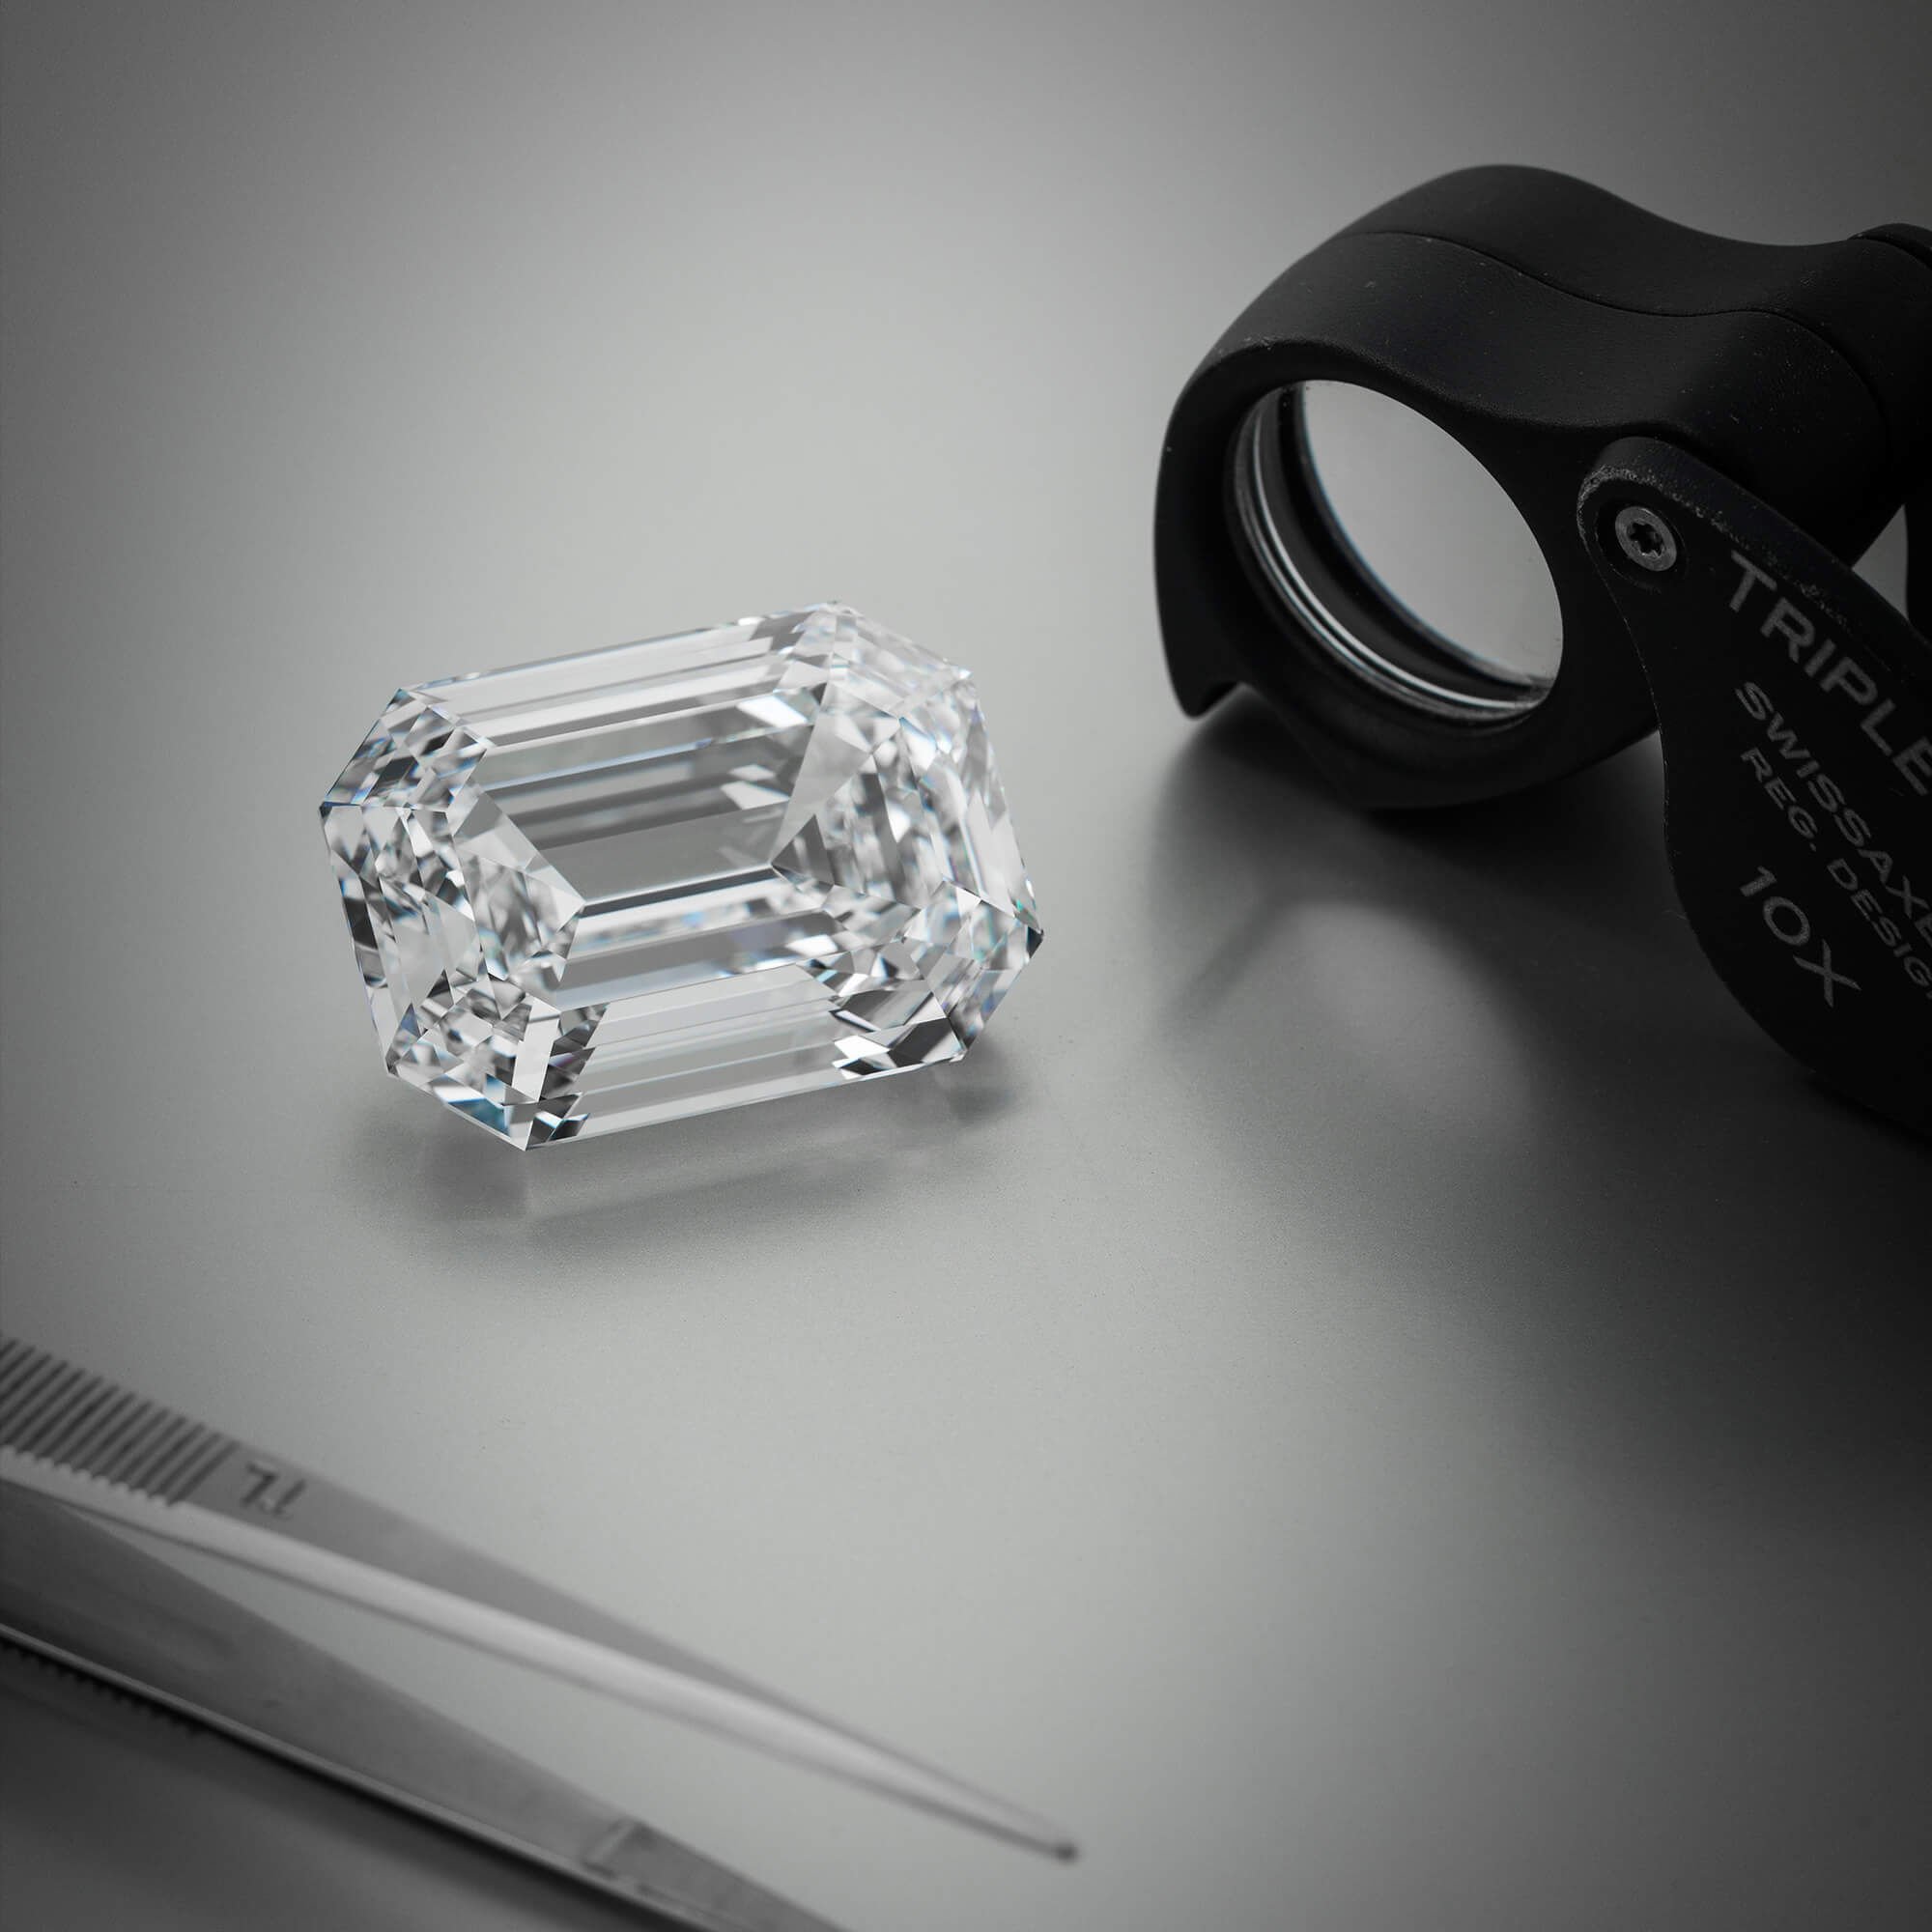 Graff Eternal Twins diamond in the workshop next to a loupe.